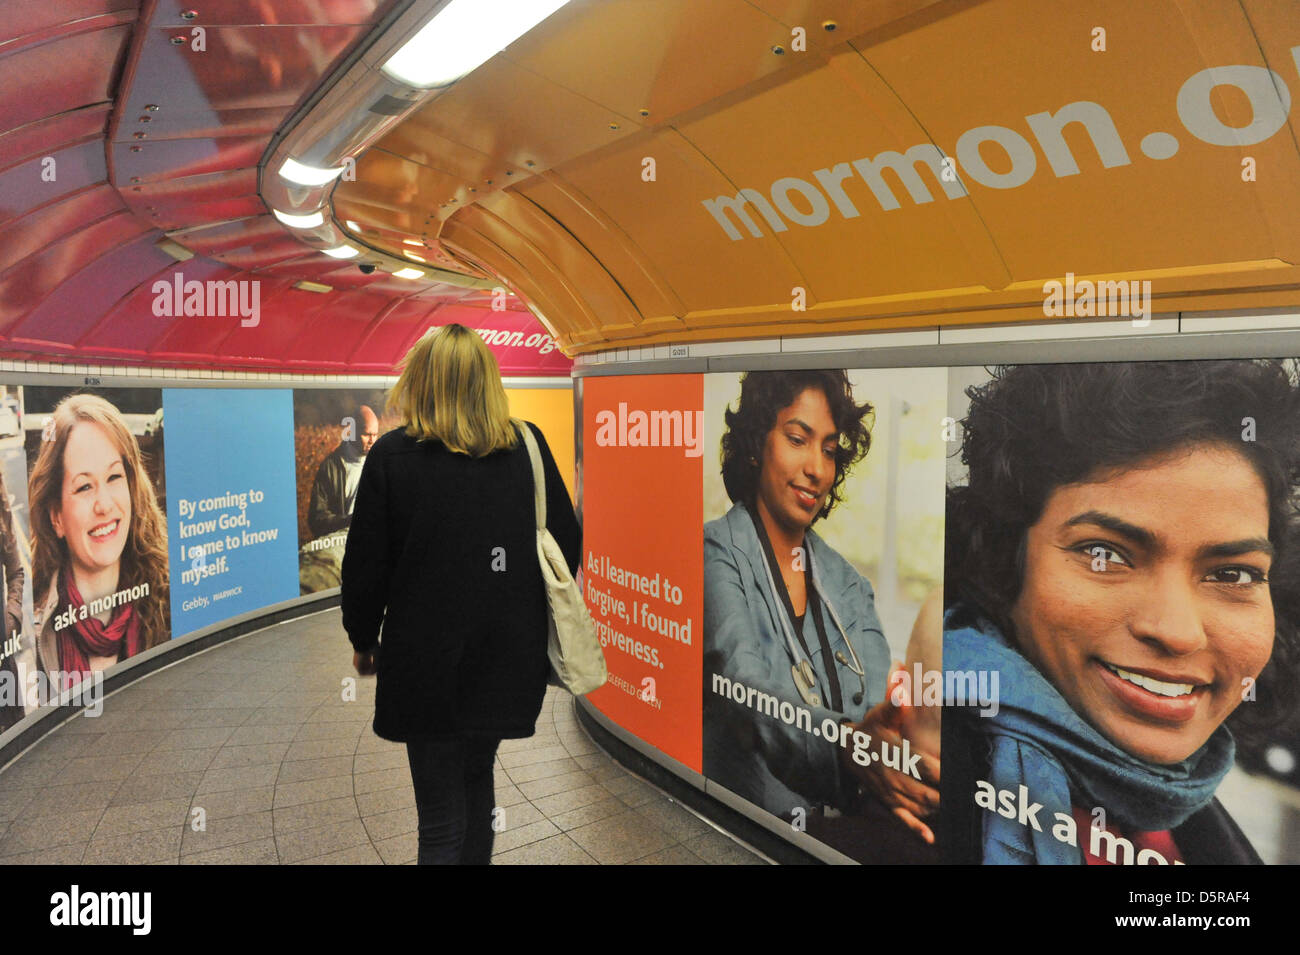 Oxford Circus station, London, UK. 8th April 2013. Commuters and tourists pass by the posters in the underground for the Mormon Church. The Church of Jesus Christ of Latter-day Saints launches an advertising campaign in London with the slogans "I'm a Mormon" and "Ask a Mormon", the campaign in tube stations and on buses is on the back of the stage comedy musical, The Book of Mormon. Stock Photo